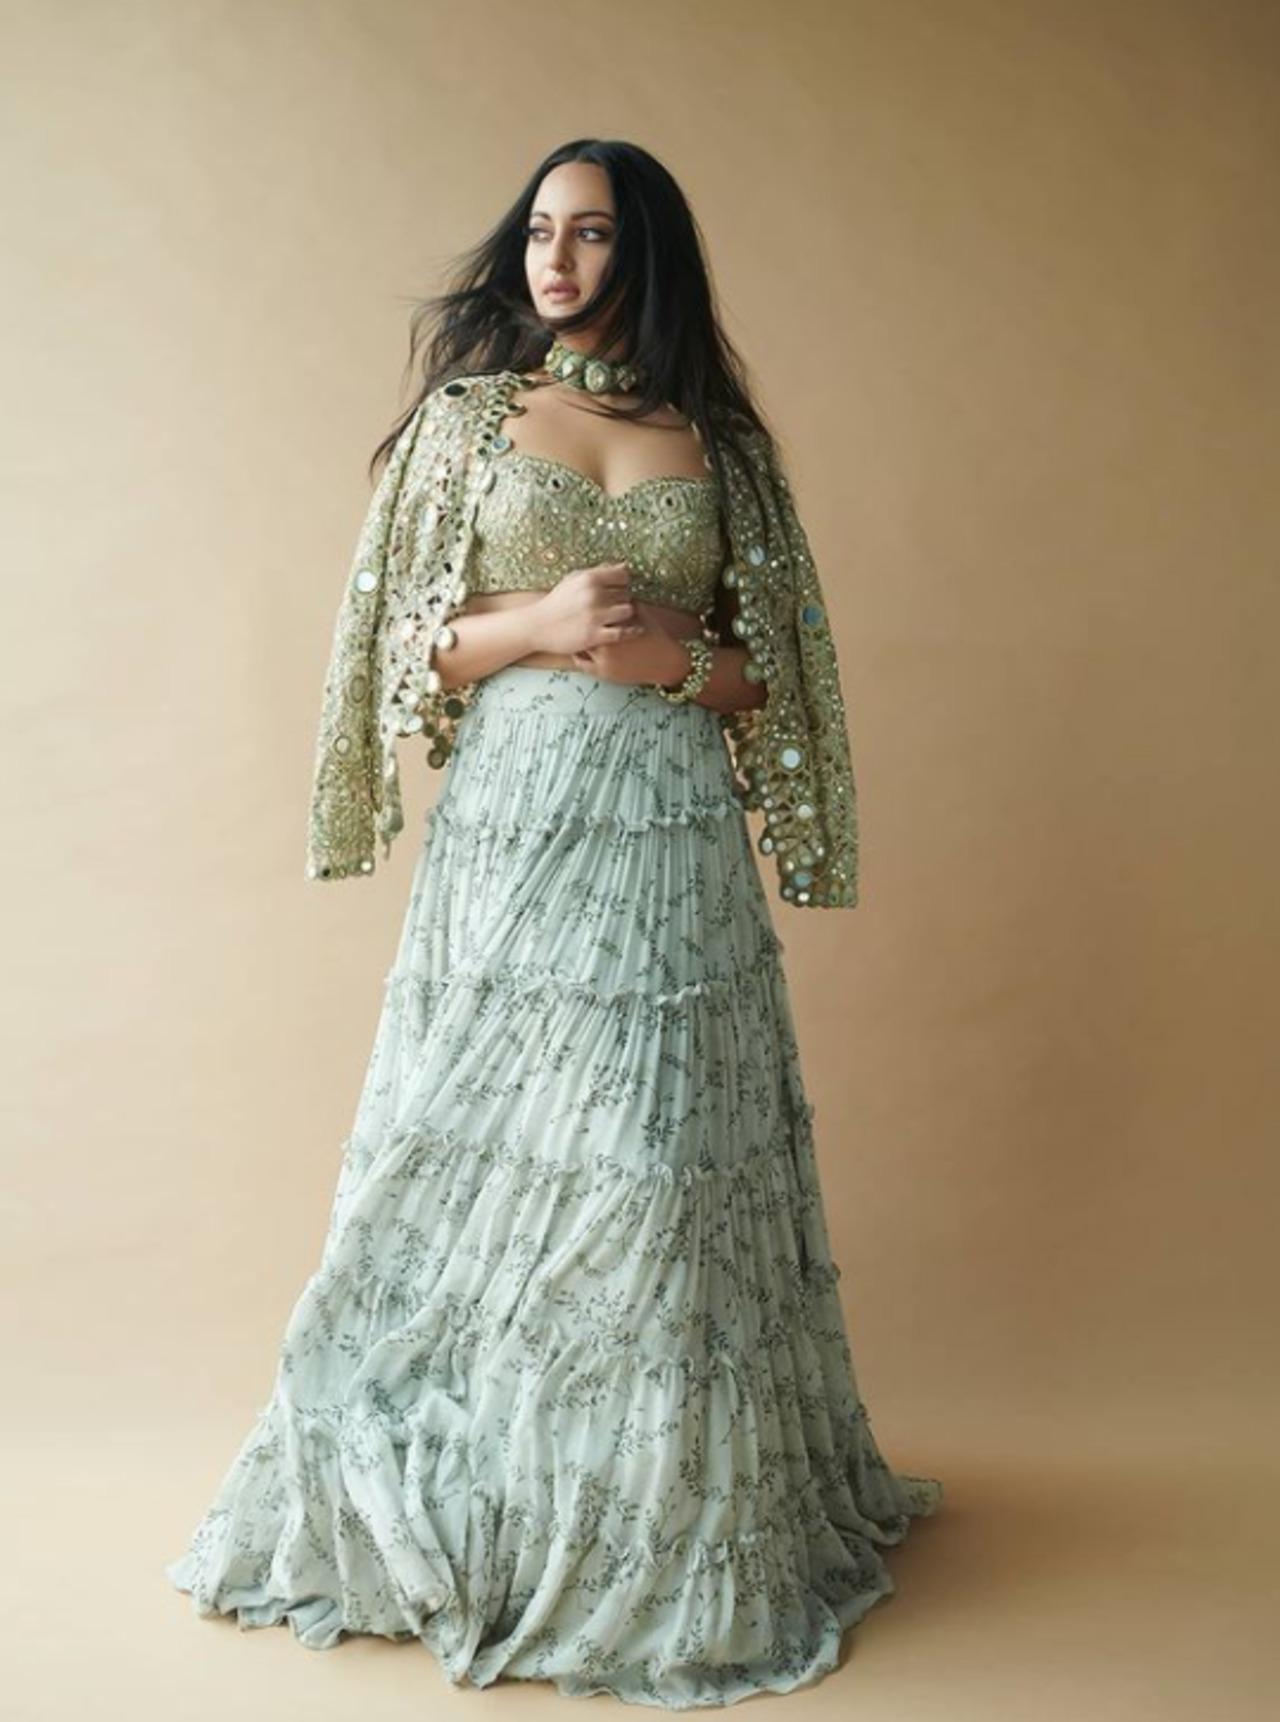 Sonakshi Sinha often takes to Instagram to serve up some style glam and even share stunning outfits from her travel diaries. She looked gorgeous in this pastel-mint green lehenga with a mirror-sequinned shrug. Her thick statement choker jewellery brought her minimal makeup